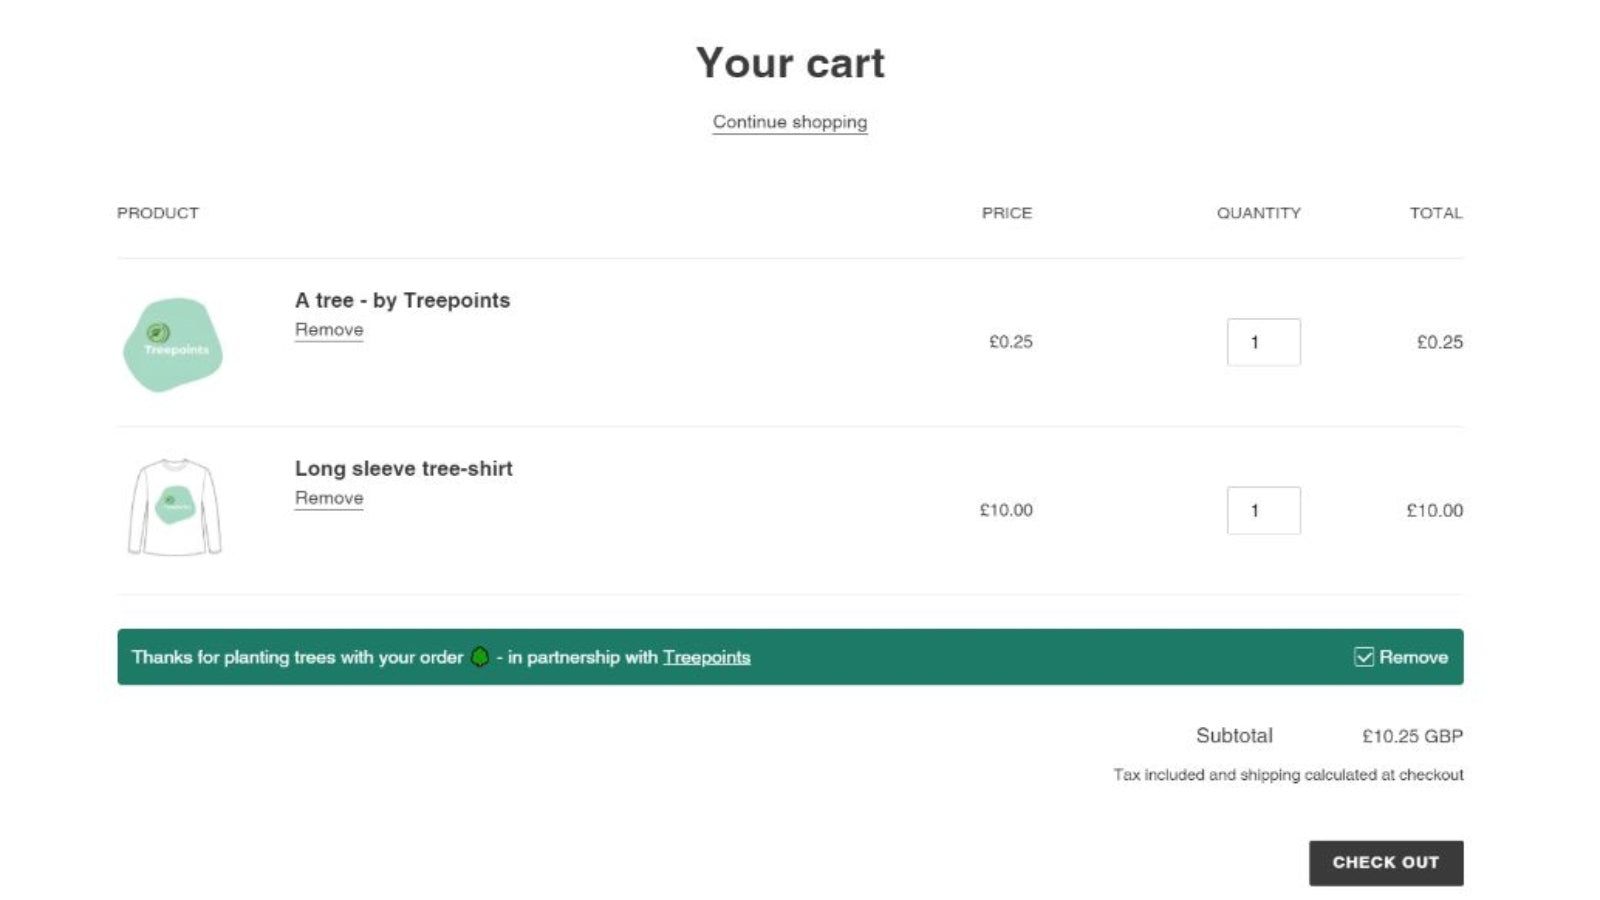 View in checkout, box ticked (for opt in - tree planting)